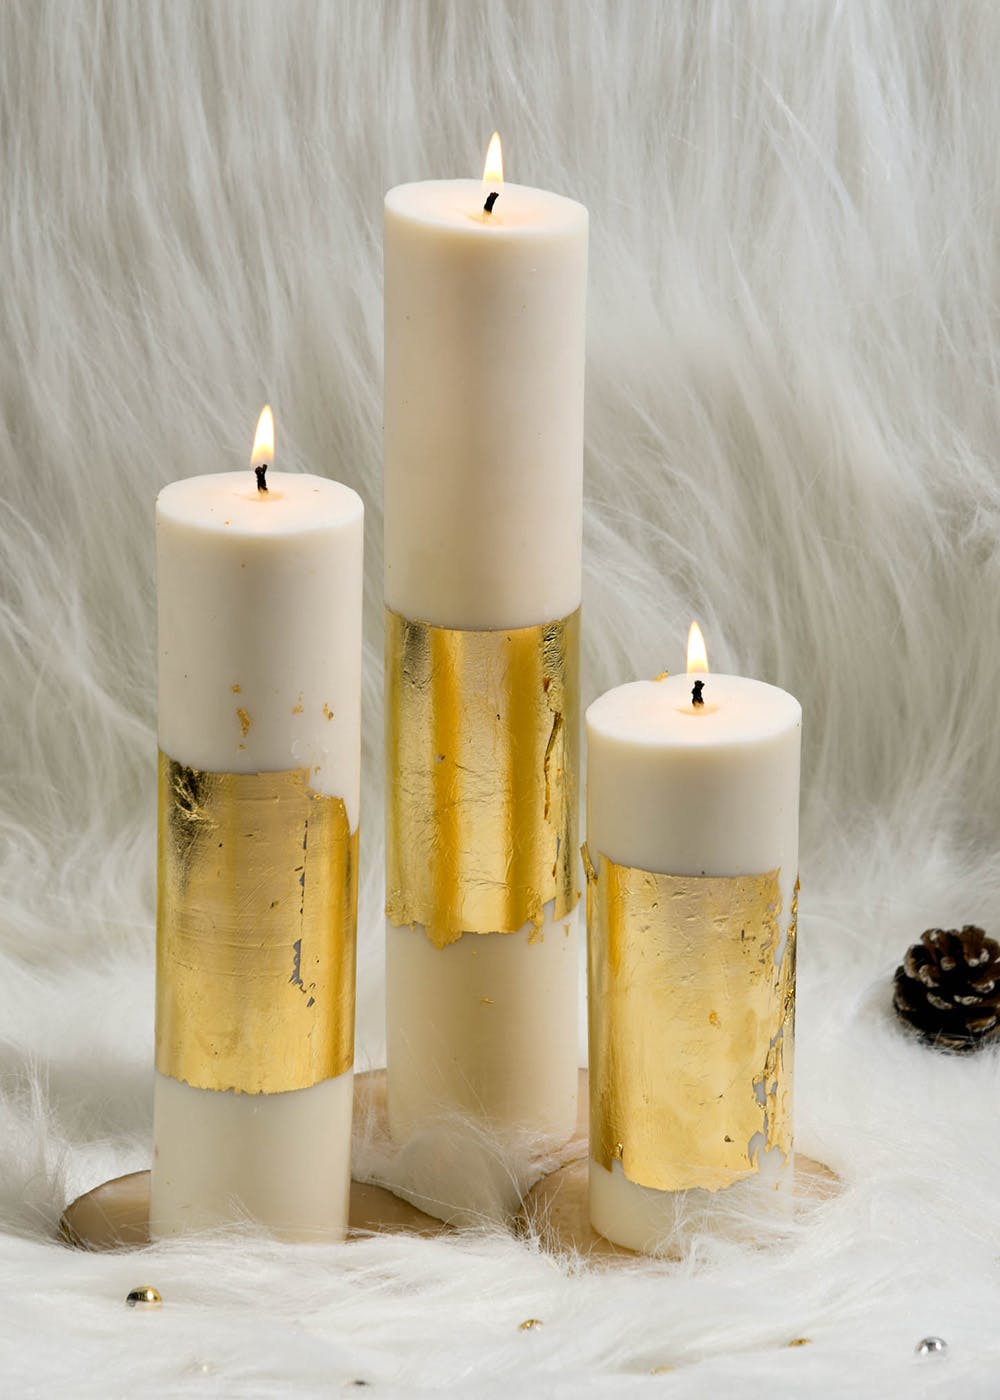 Get Peace - Set Of 3 White Gold Pillar Candles - Cinnamon Roll